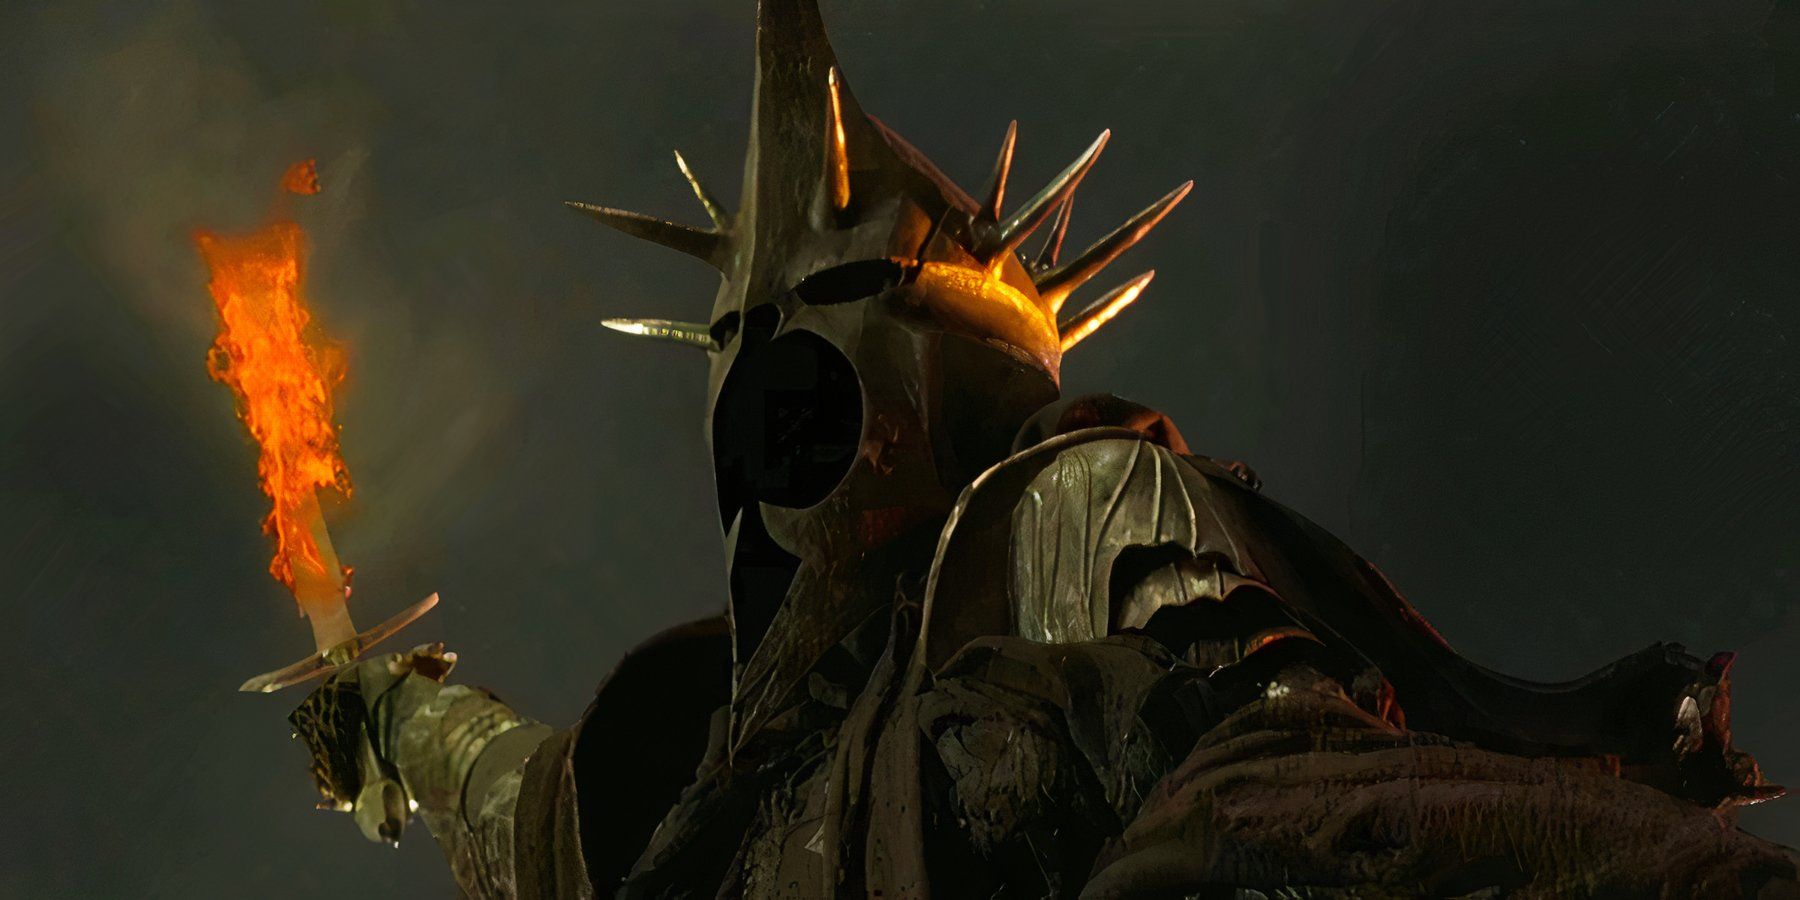 The Witch King of Angmar, played by actor Lawrence Makoare, raises his flaming sword into the air in The Lord of the Rings: The Return of the King.